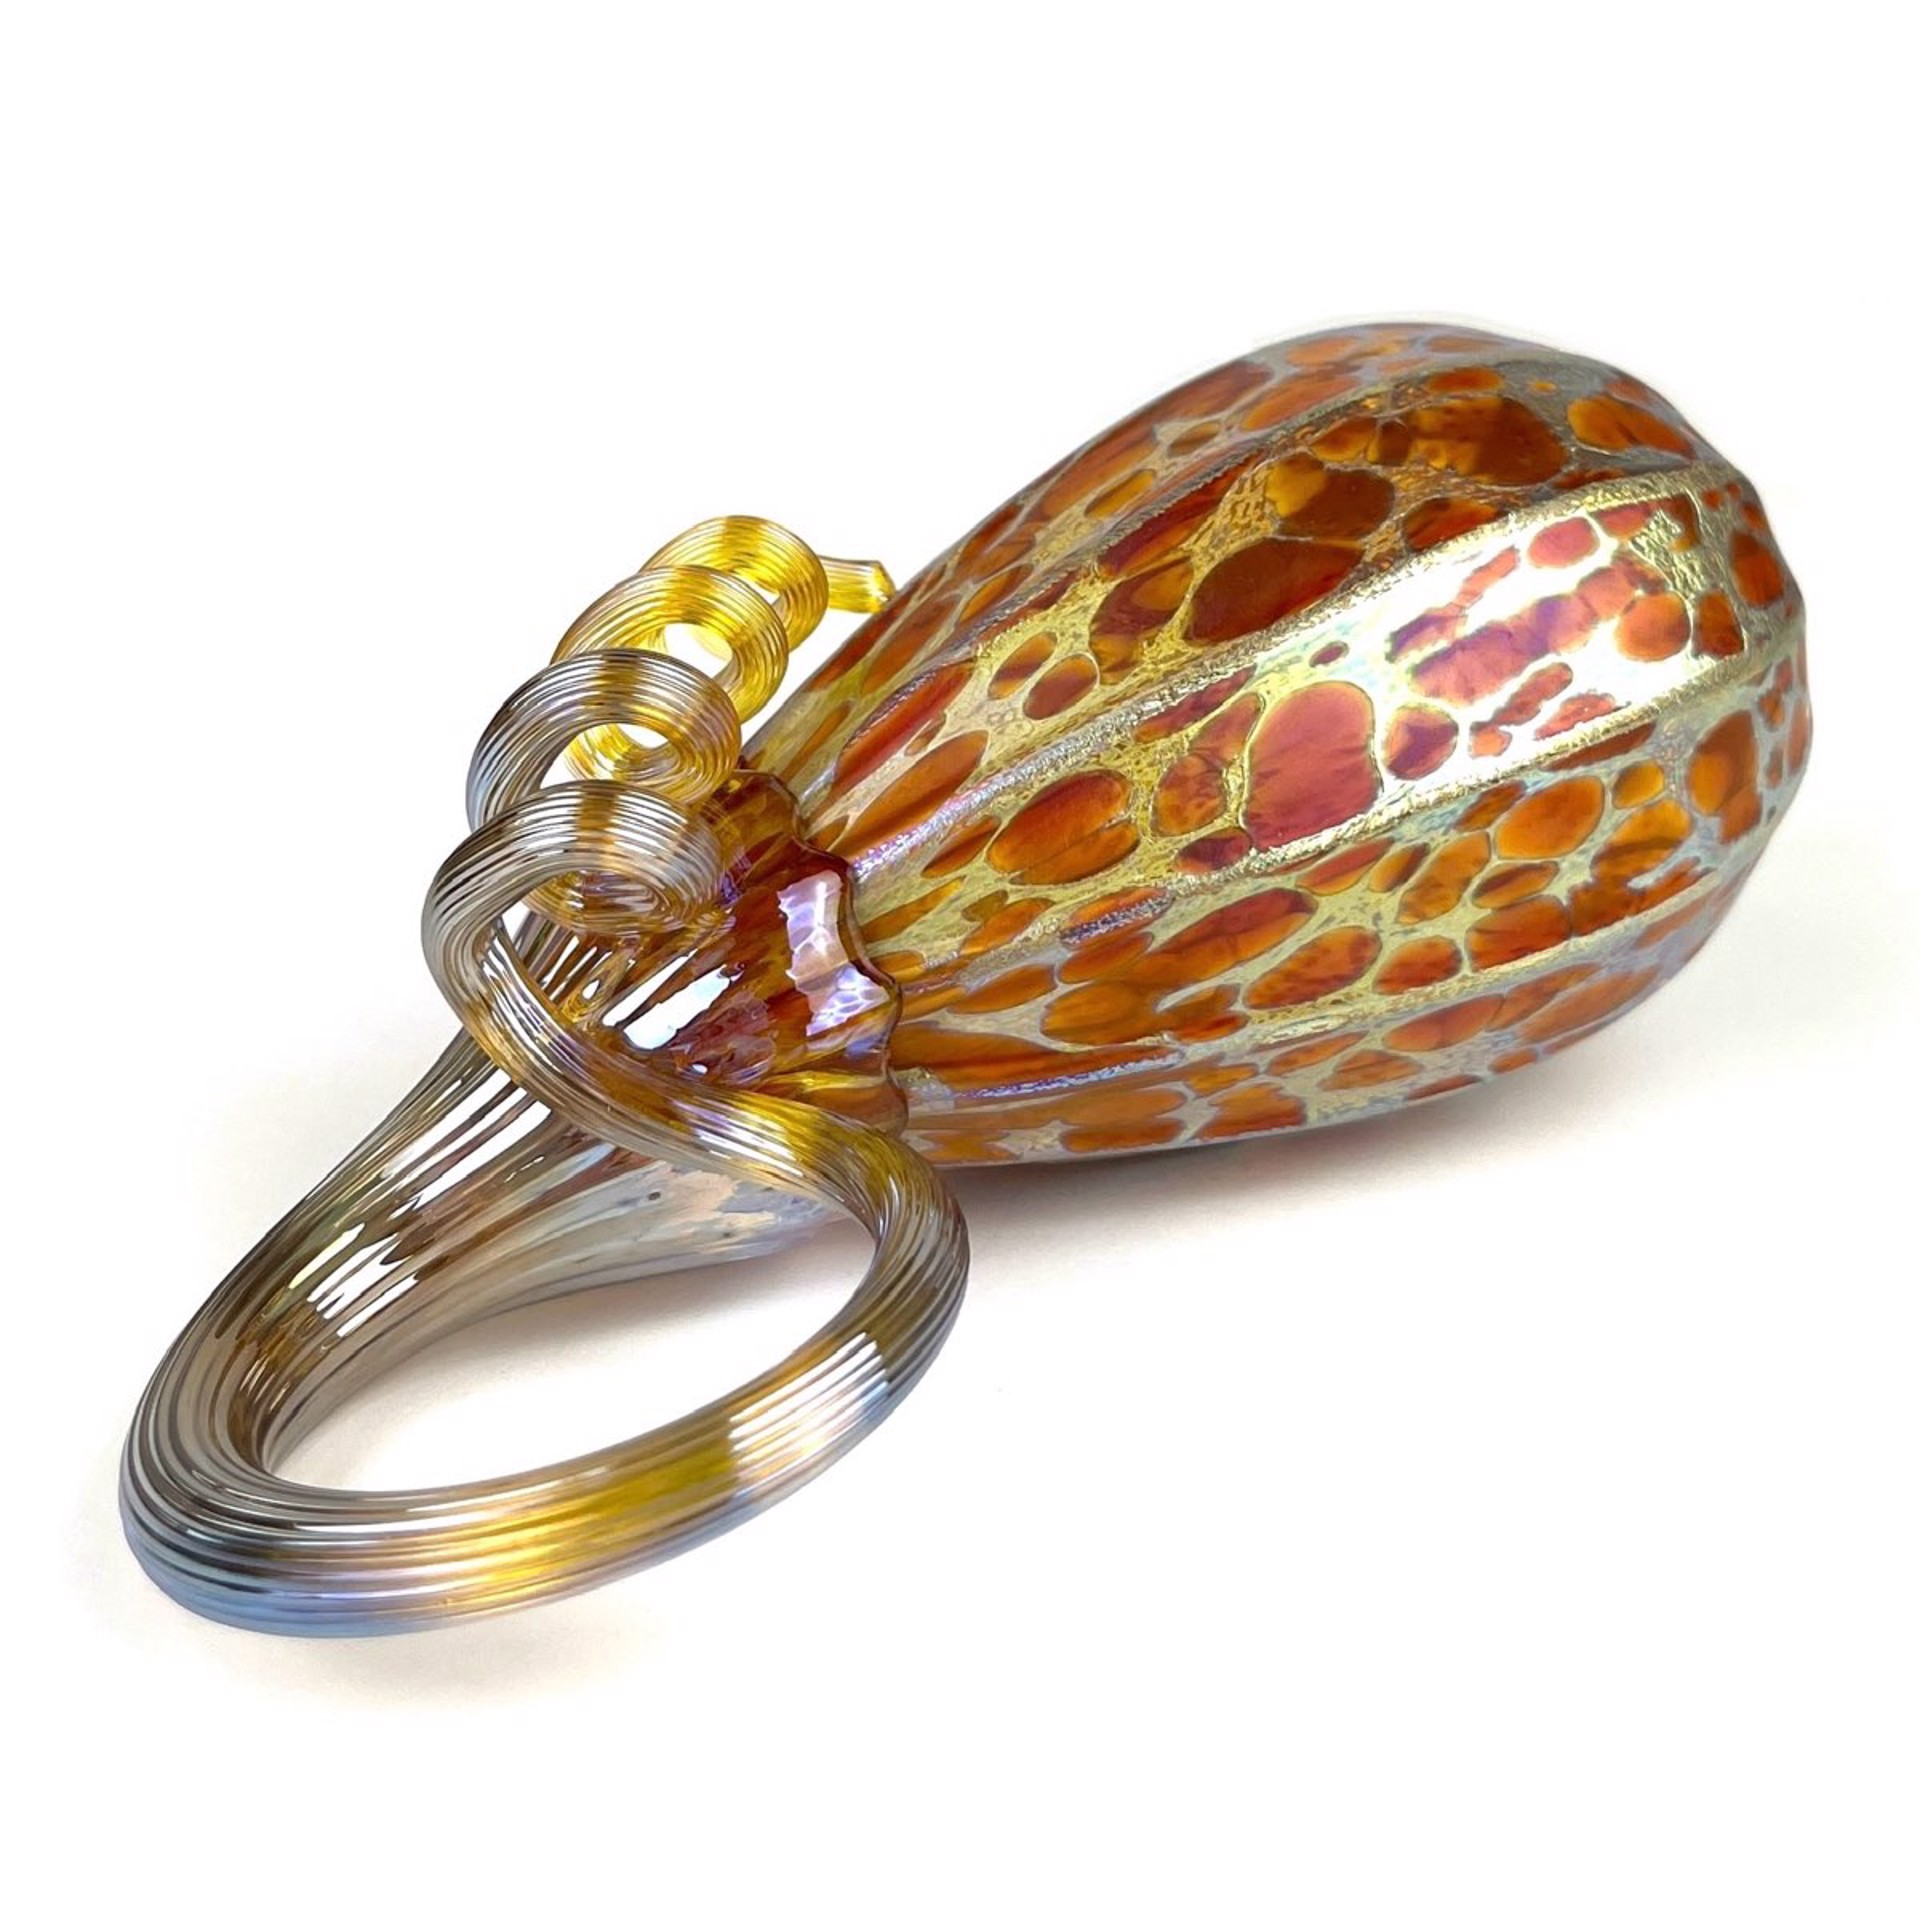 Petite Harvest Gourd by Furnace Glass